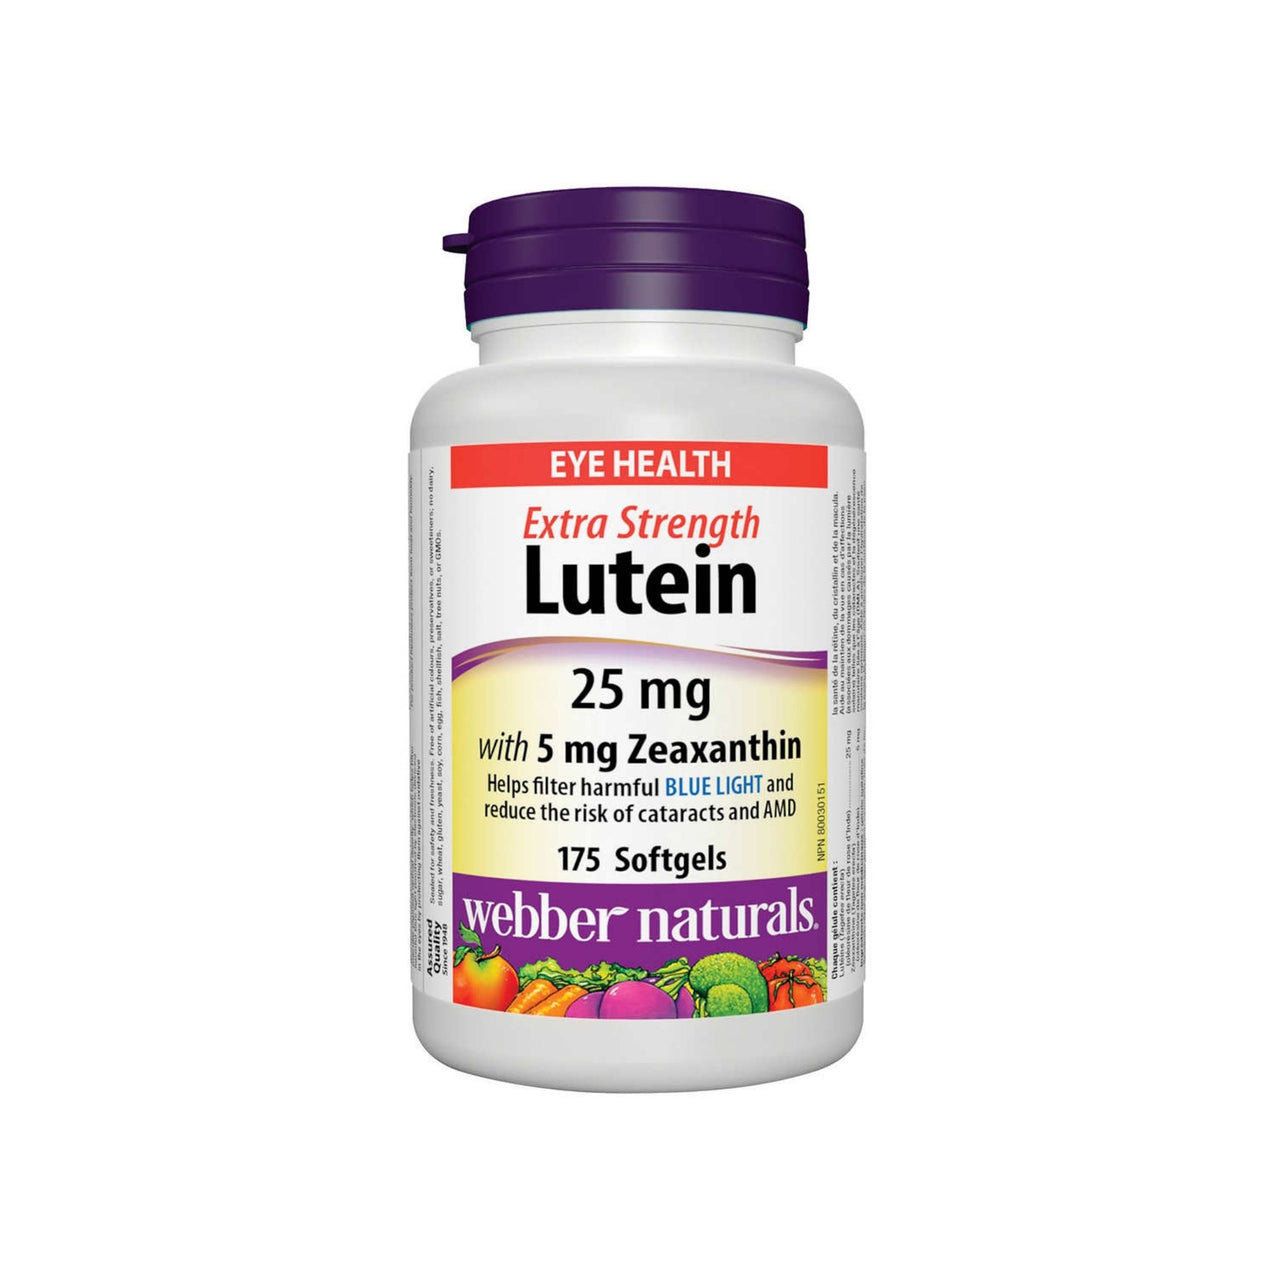 Image of Webber Naturals Lutein 25mg with 5mg of Zeaxanthin - 175 softgels